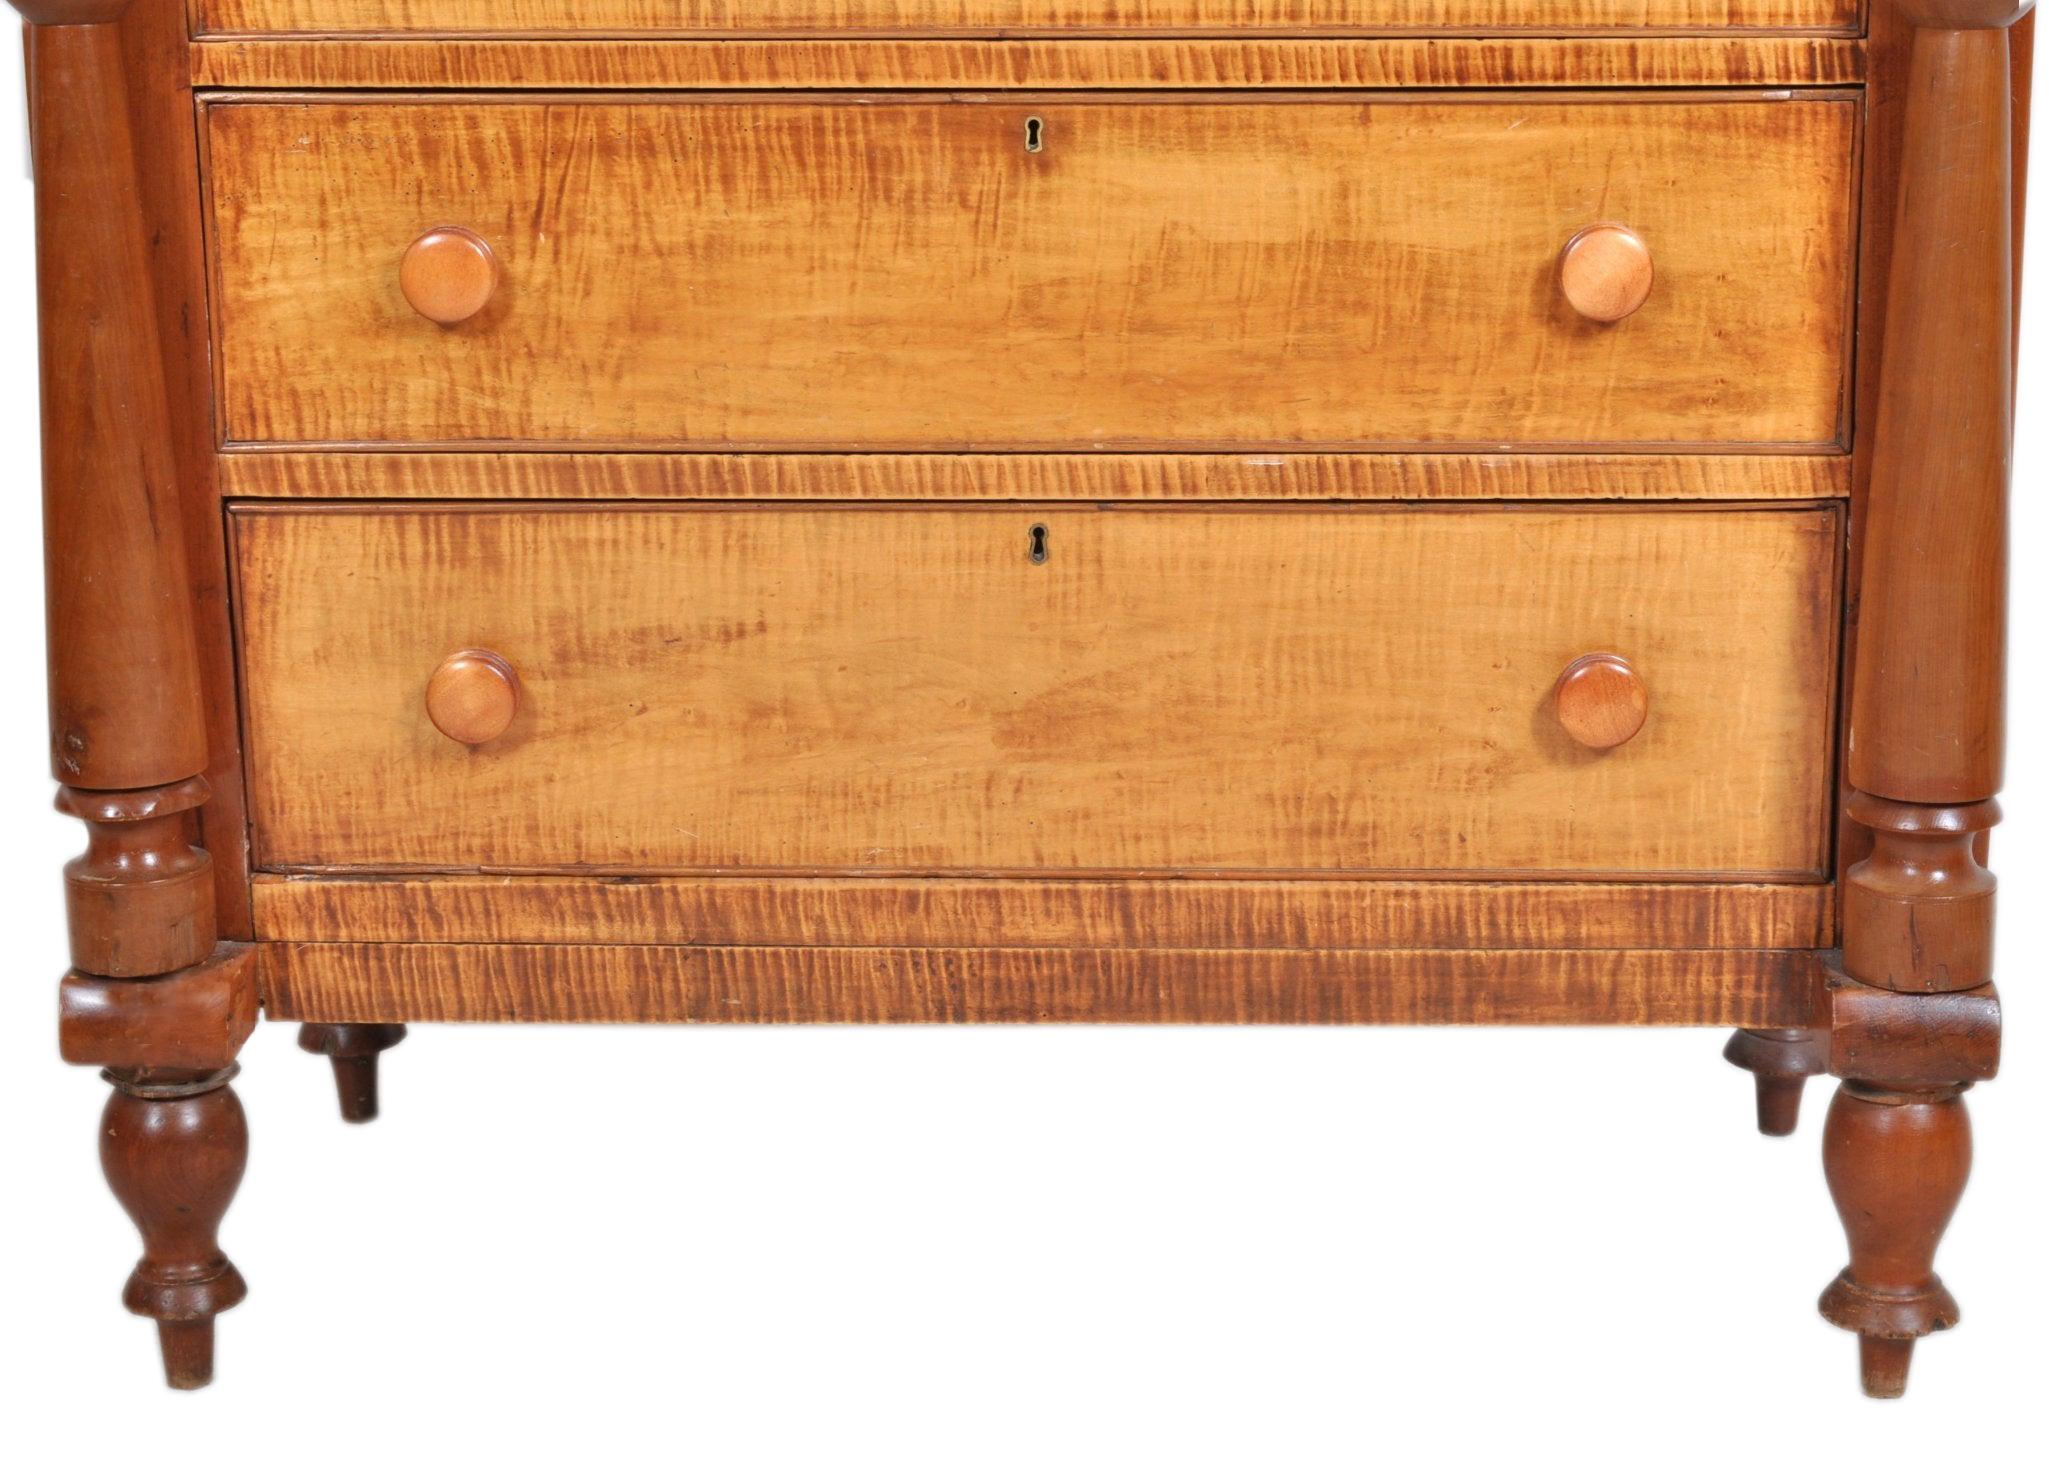 American Antique Pennsylvanian 'Tiger Maple' Chest of Drawers, circa 1840